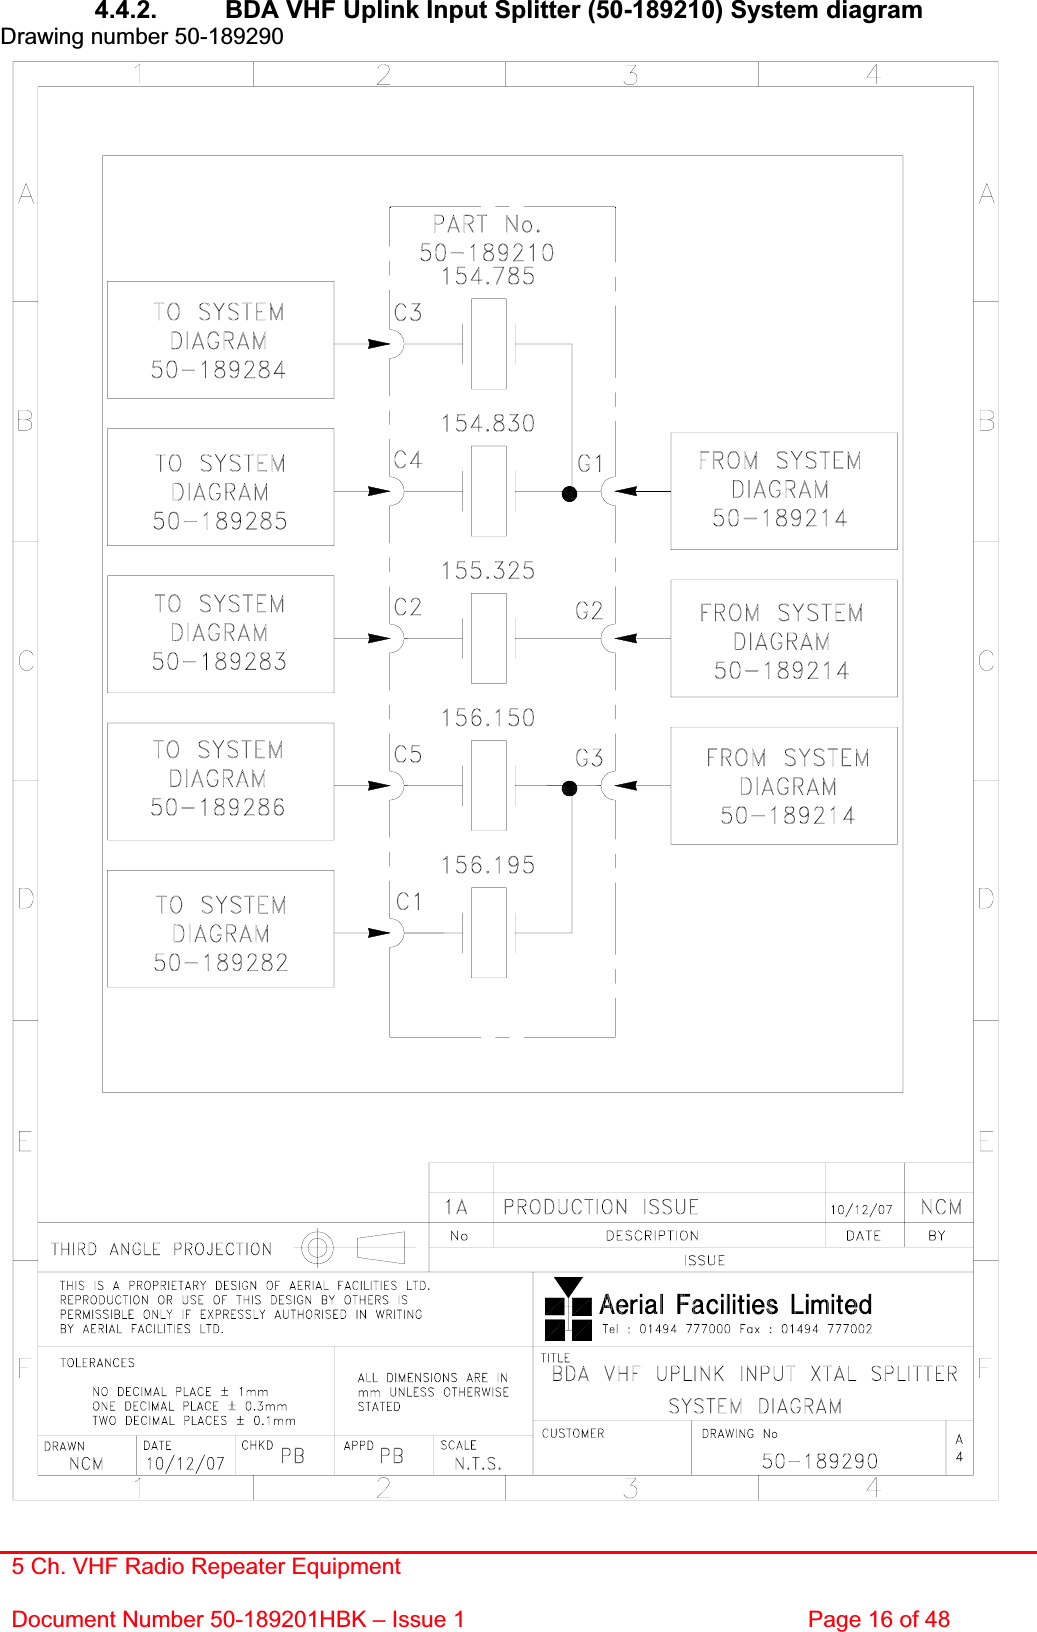 5 Ch. VHF Radio Repeater EquipmentDocument Number 50-189201HBK – Issue 1  Page 16 of 48 4.4.2.  BDA VHF Uplink Input Splitter (50-189210) System diagram Drawing number 50-189290 